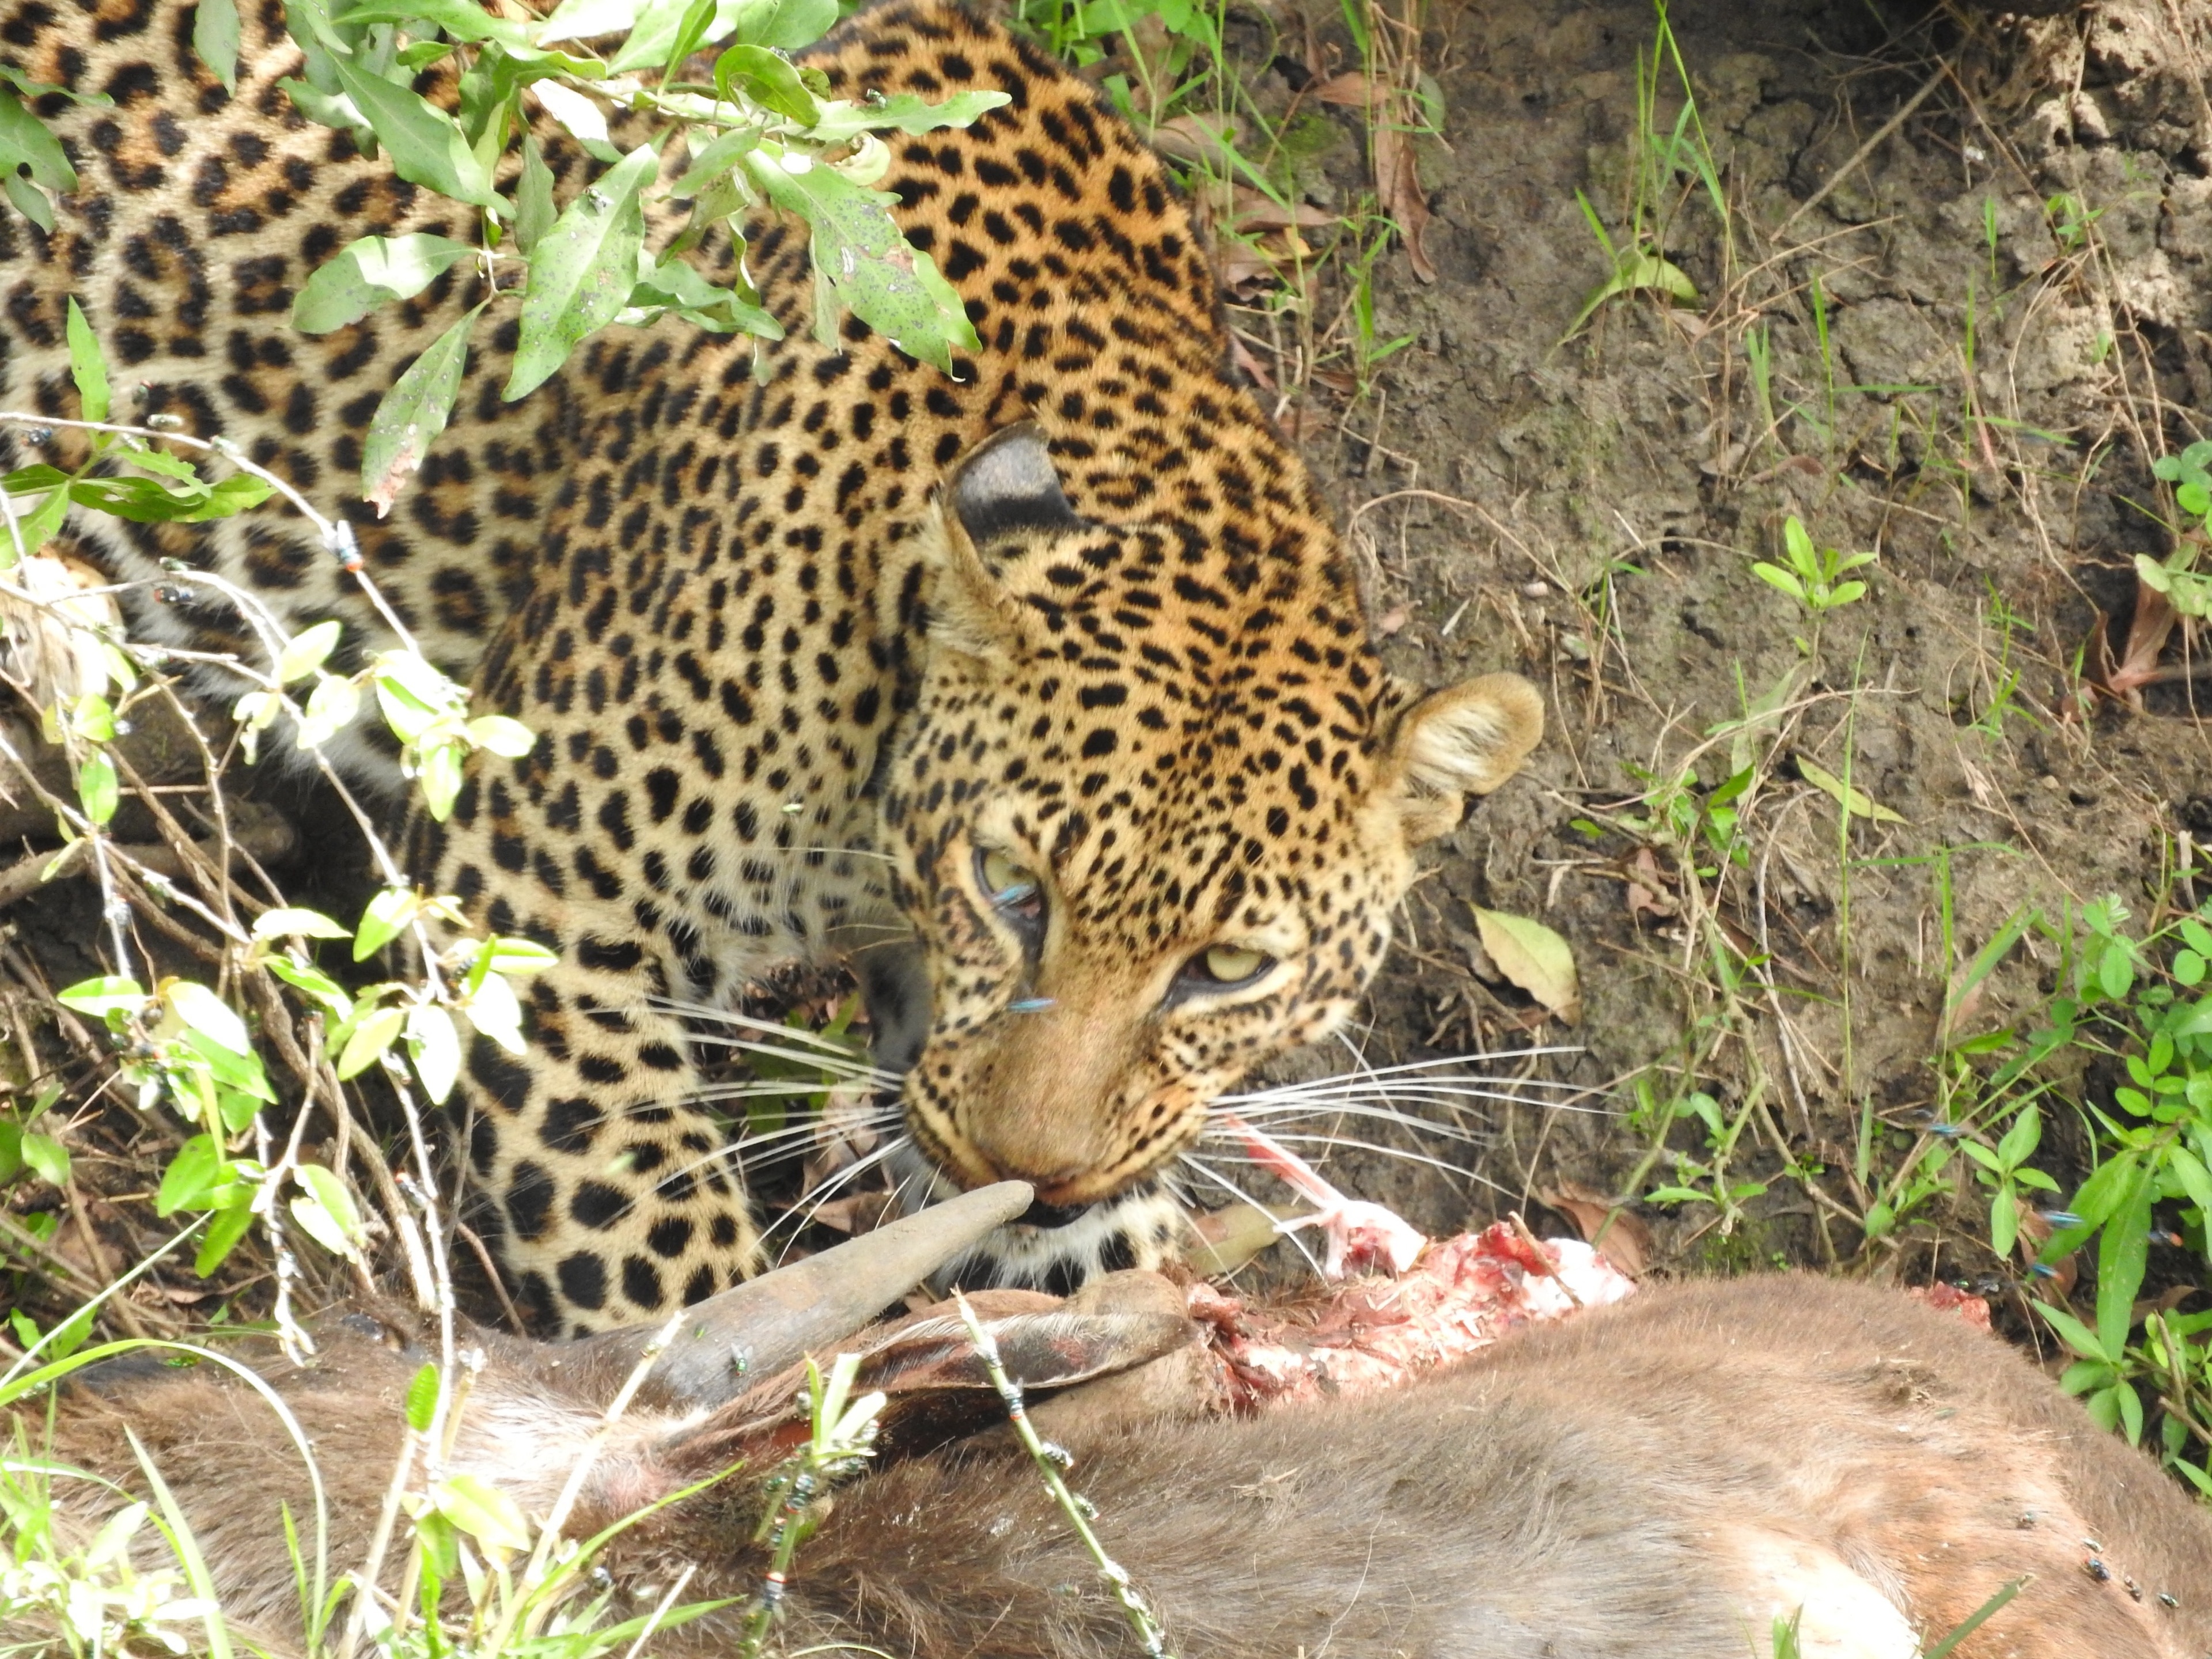 Rare sighting of a Leopard eating his kill while out on Safari.